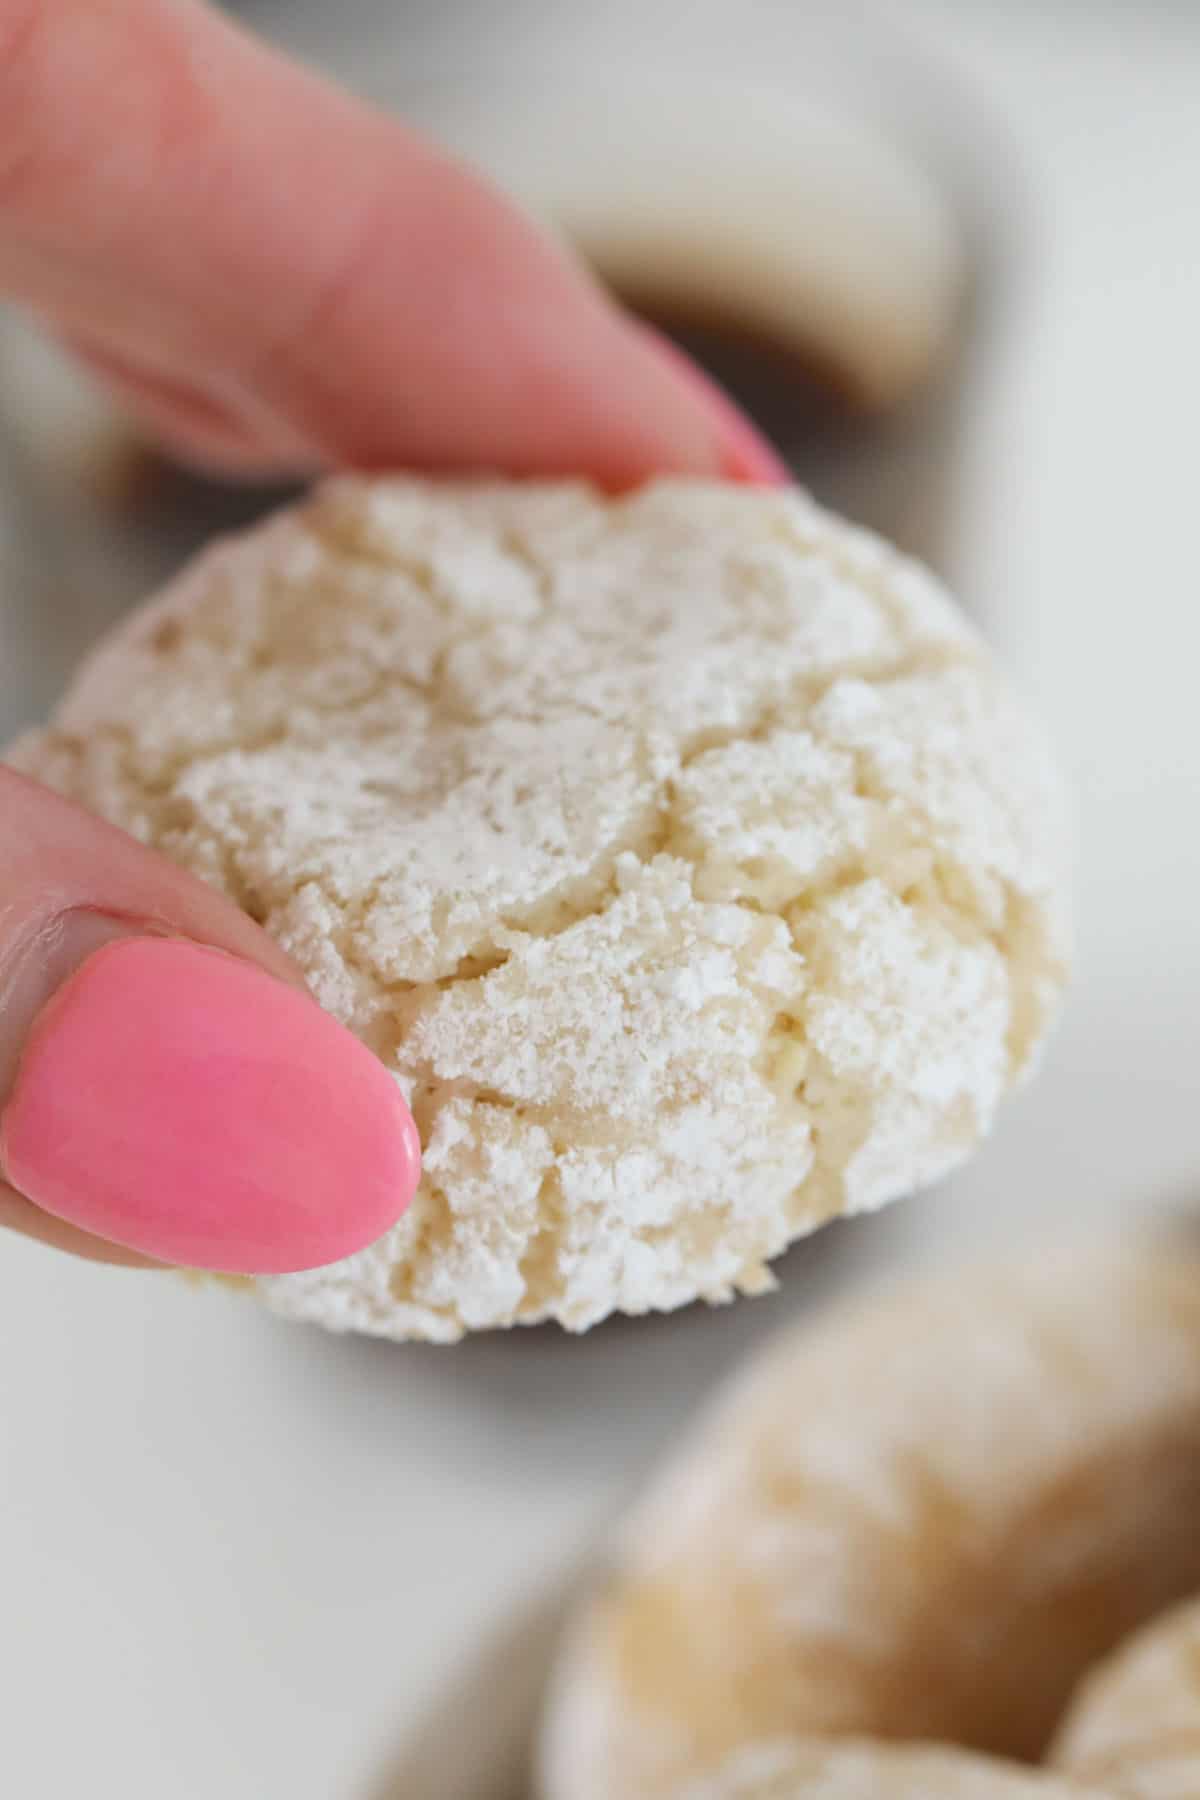 A close up of a hand holding an amaretti biscuit.